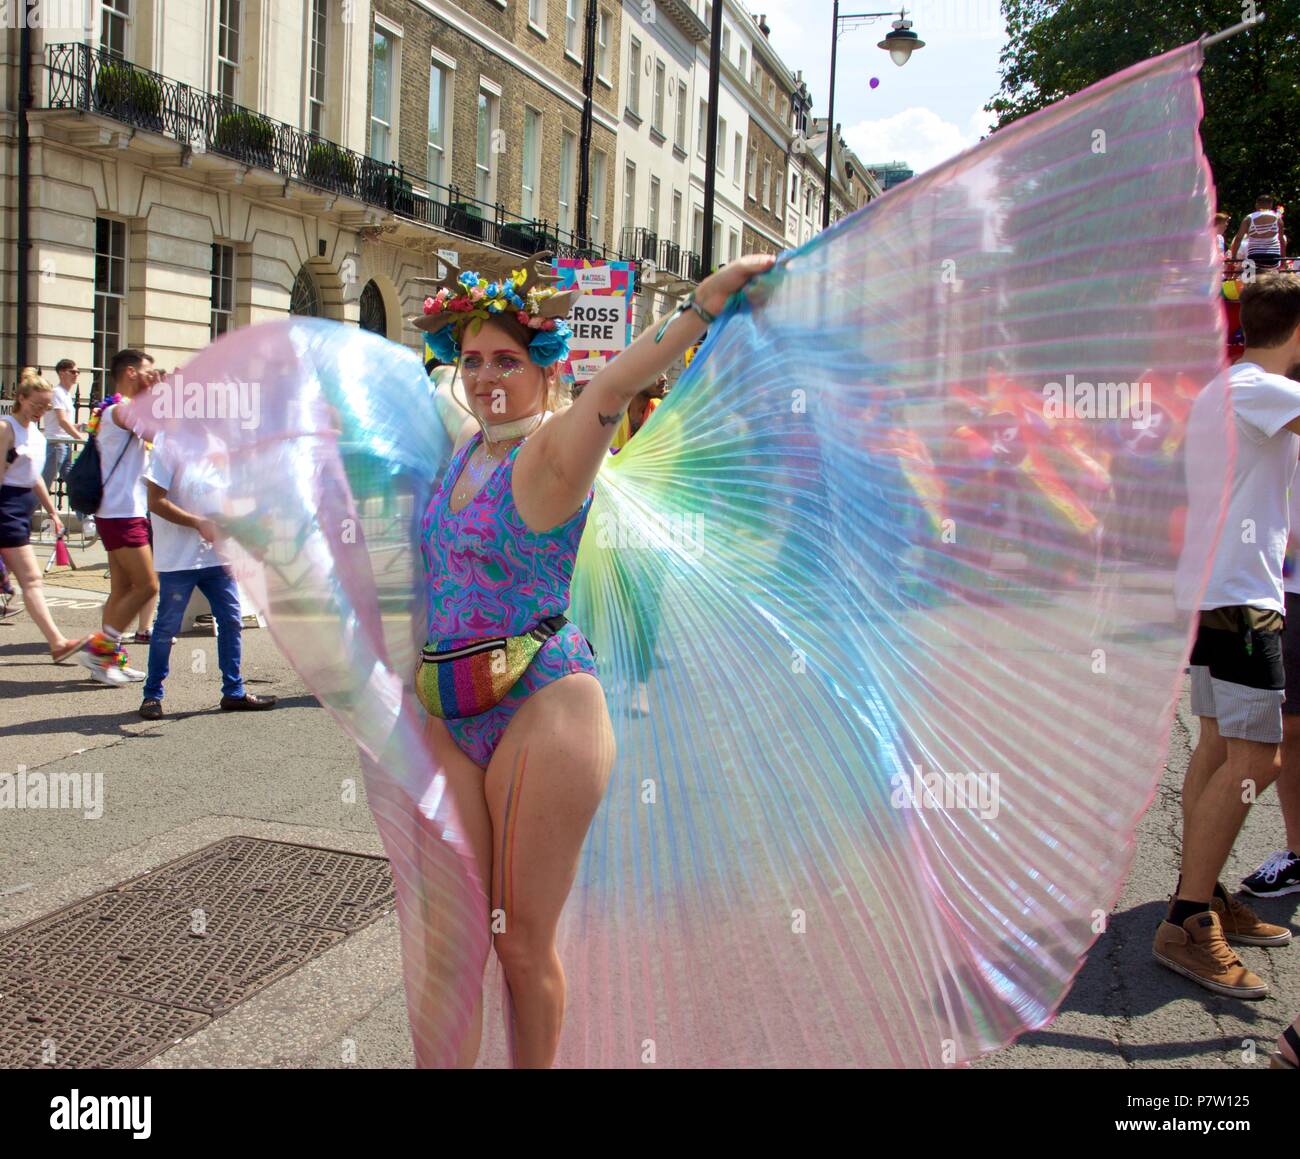 London, UK. 7th July 2018. A woman in a swimming costume and a rainbow coloured sheer cape at Pride in London 2018 Parade, joining more than 1 million attending the march today to celebrate LGBT+. Credit: Dimple Patel/Alamy Live News Stock Photo